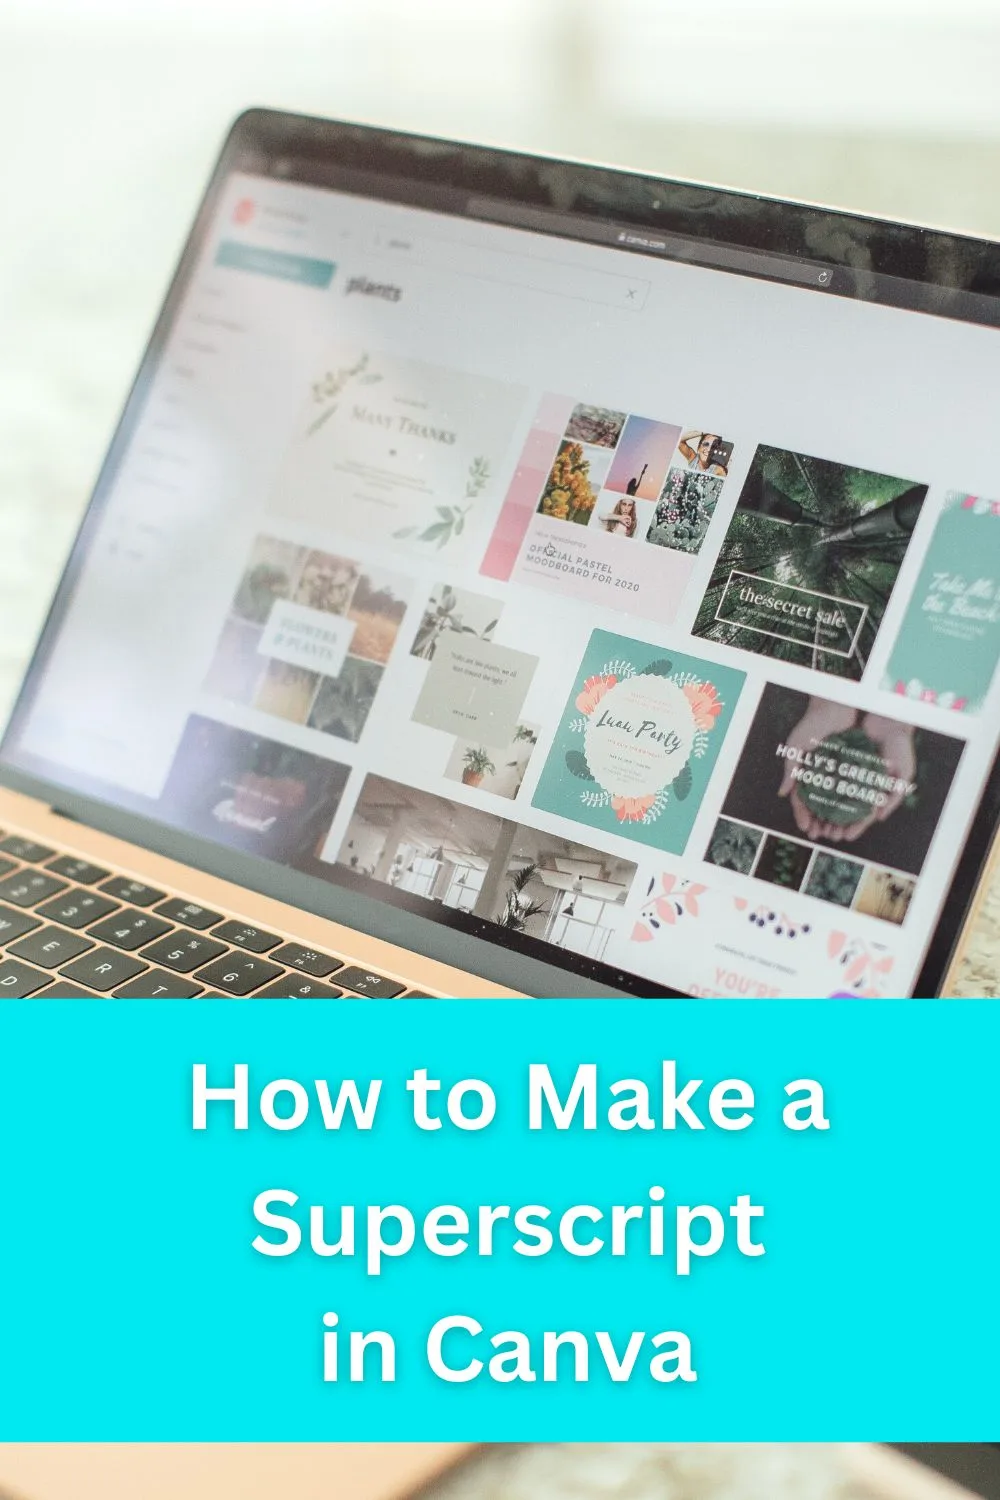 How to Make a Superscript in Canva